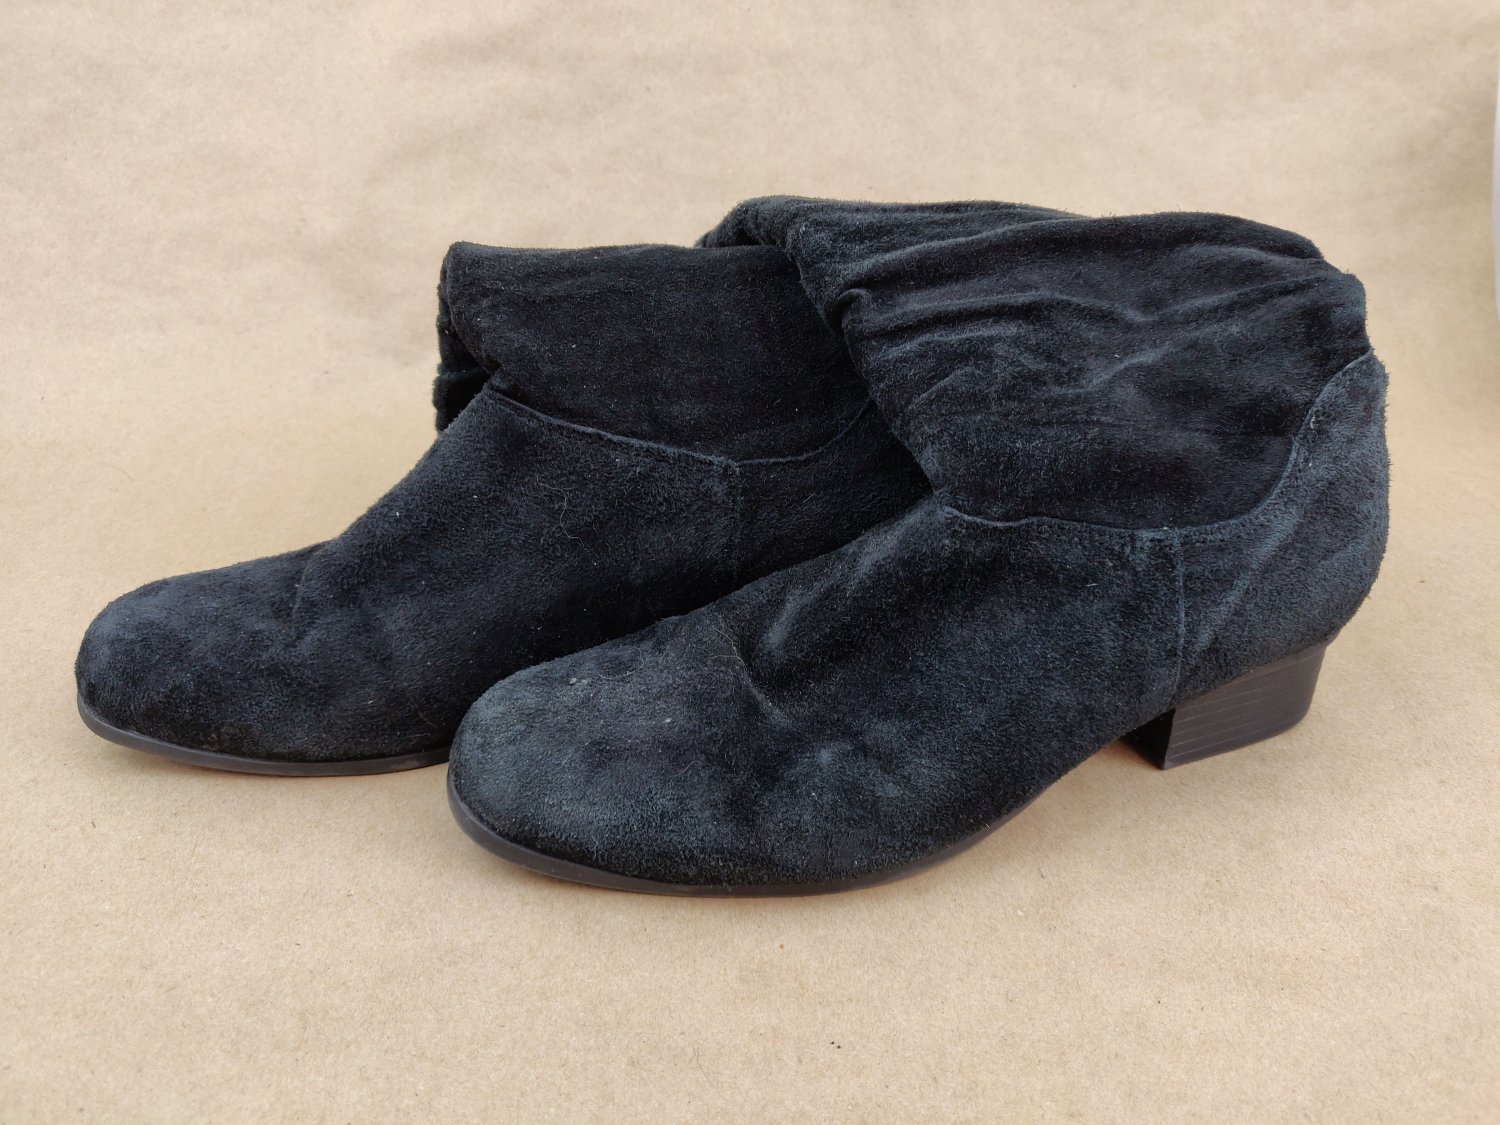 Short Black Suede Leather Boots with Heel